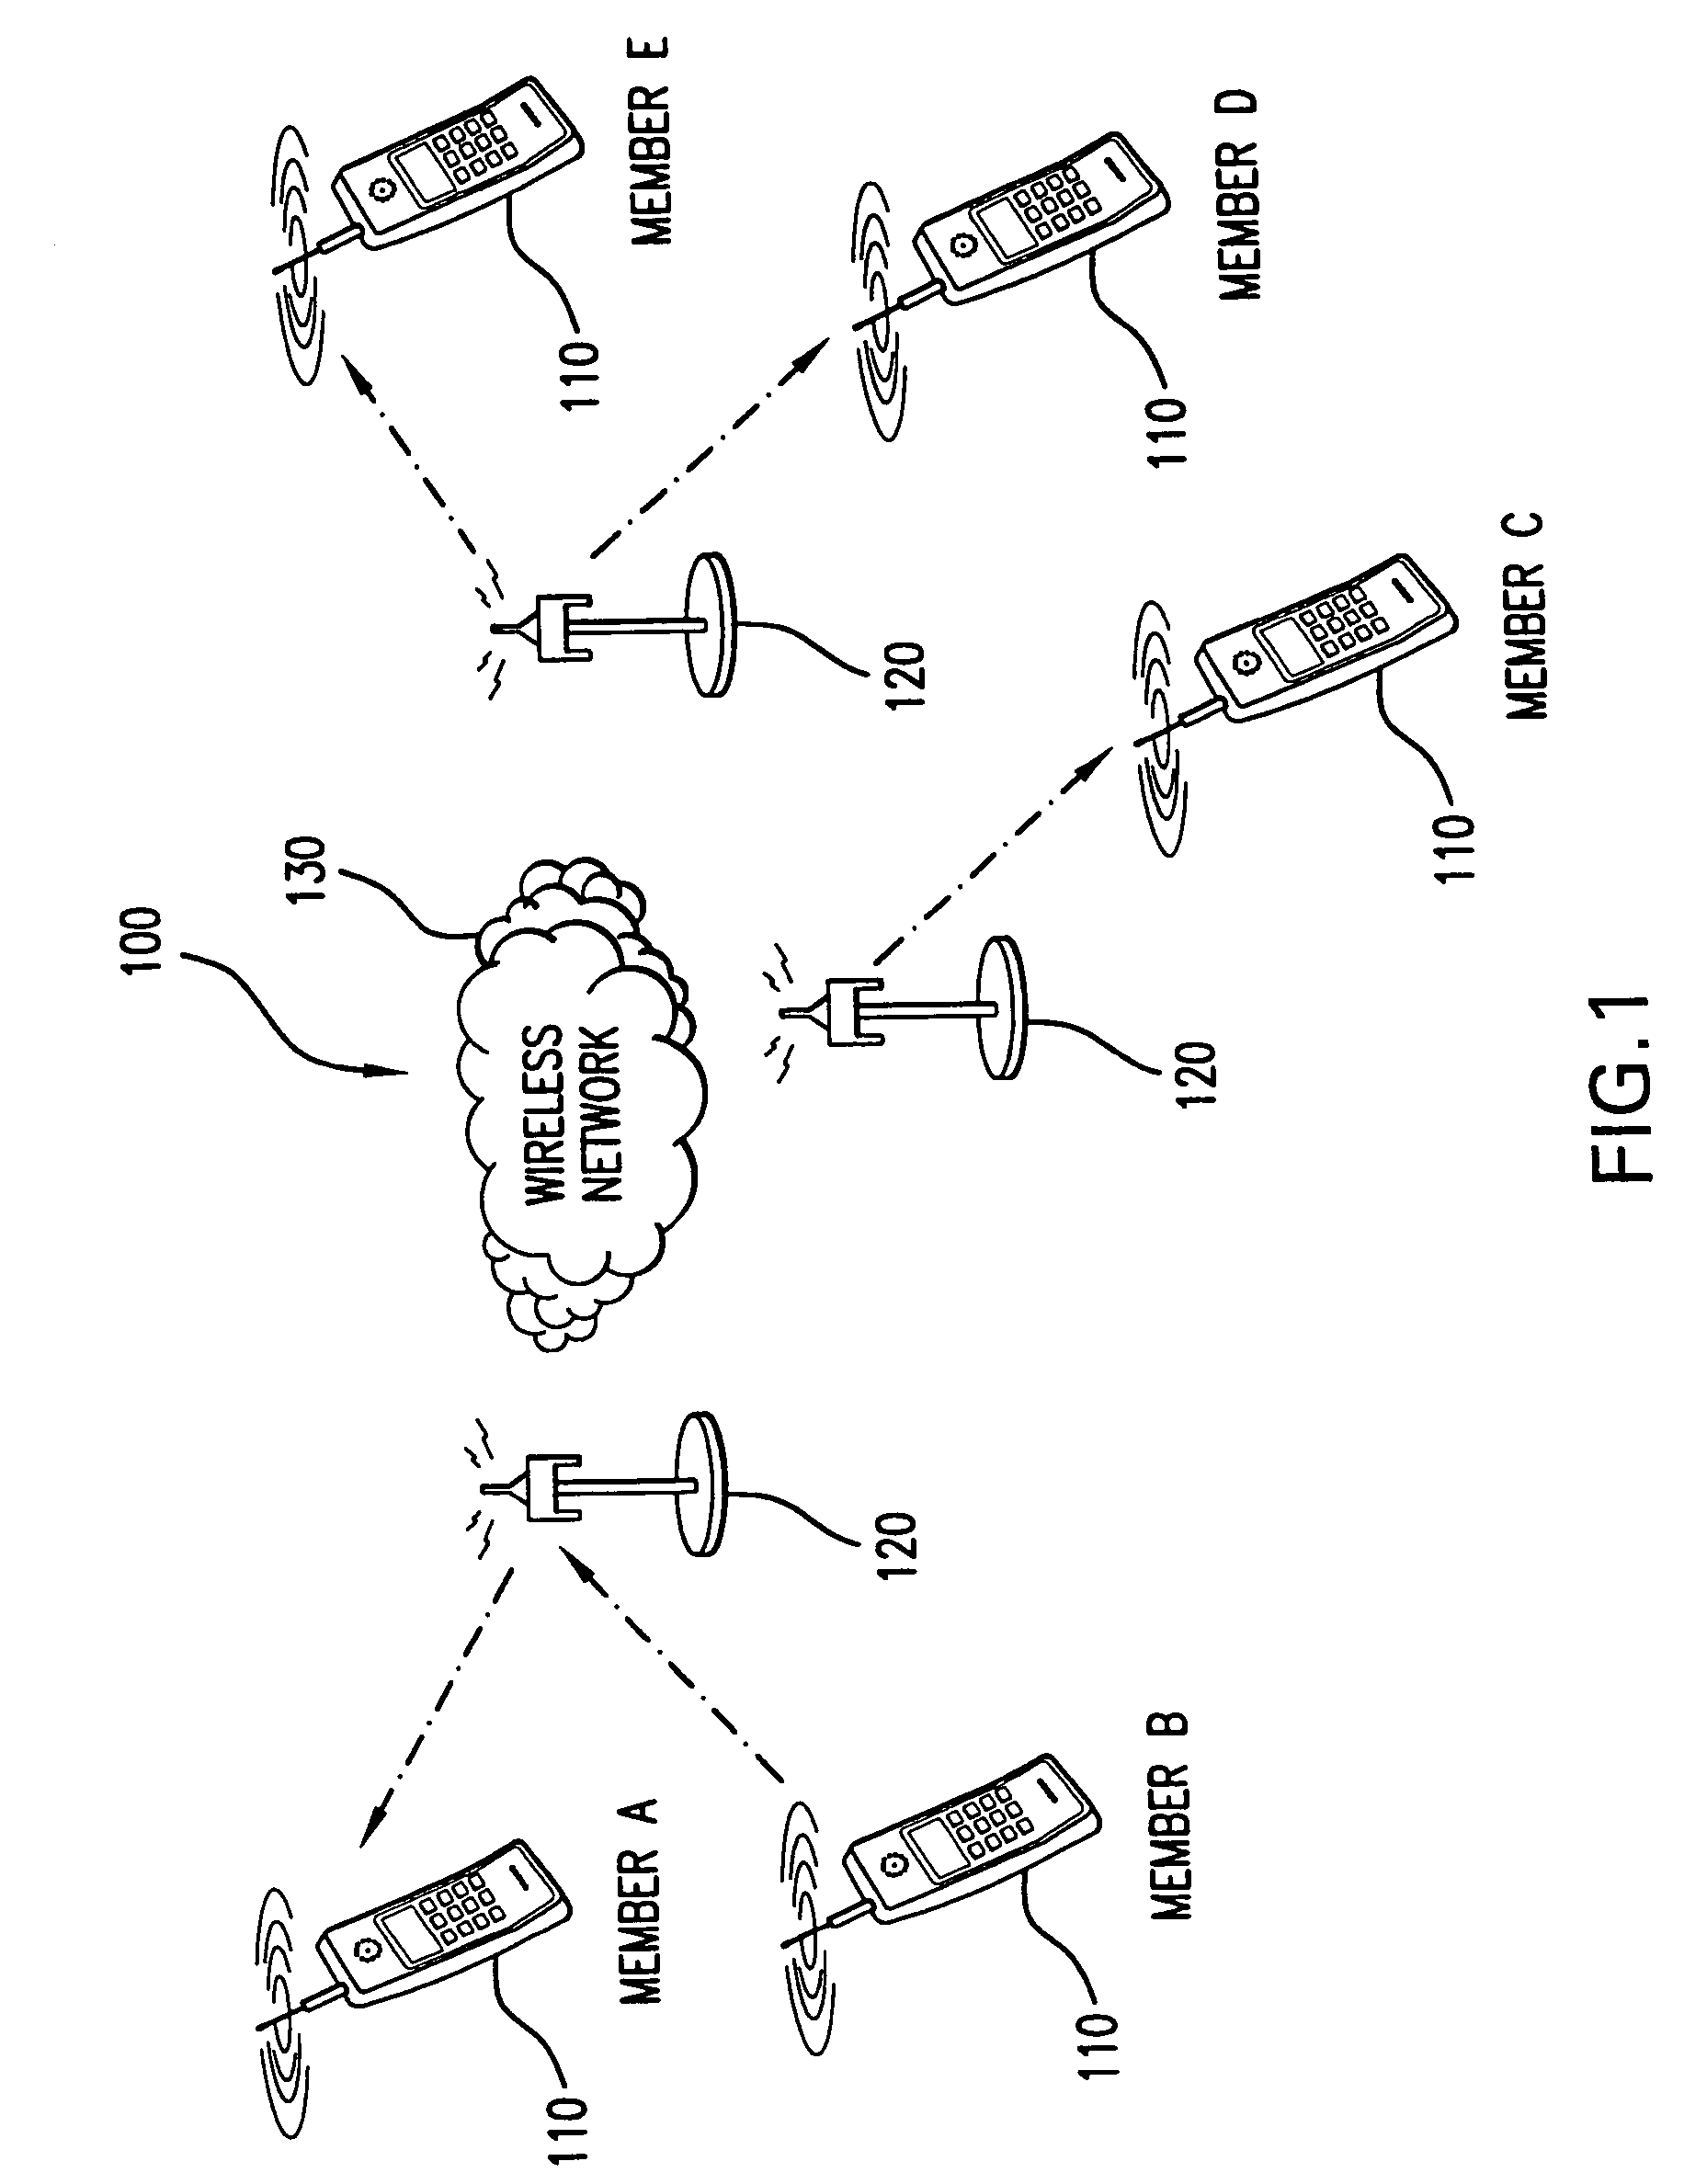 Method and apparatus for decreasing perceived push-to-talk call set-up time using a buffer for initial speech burst